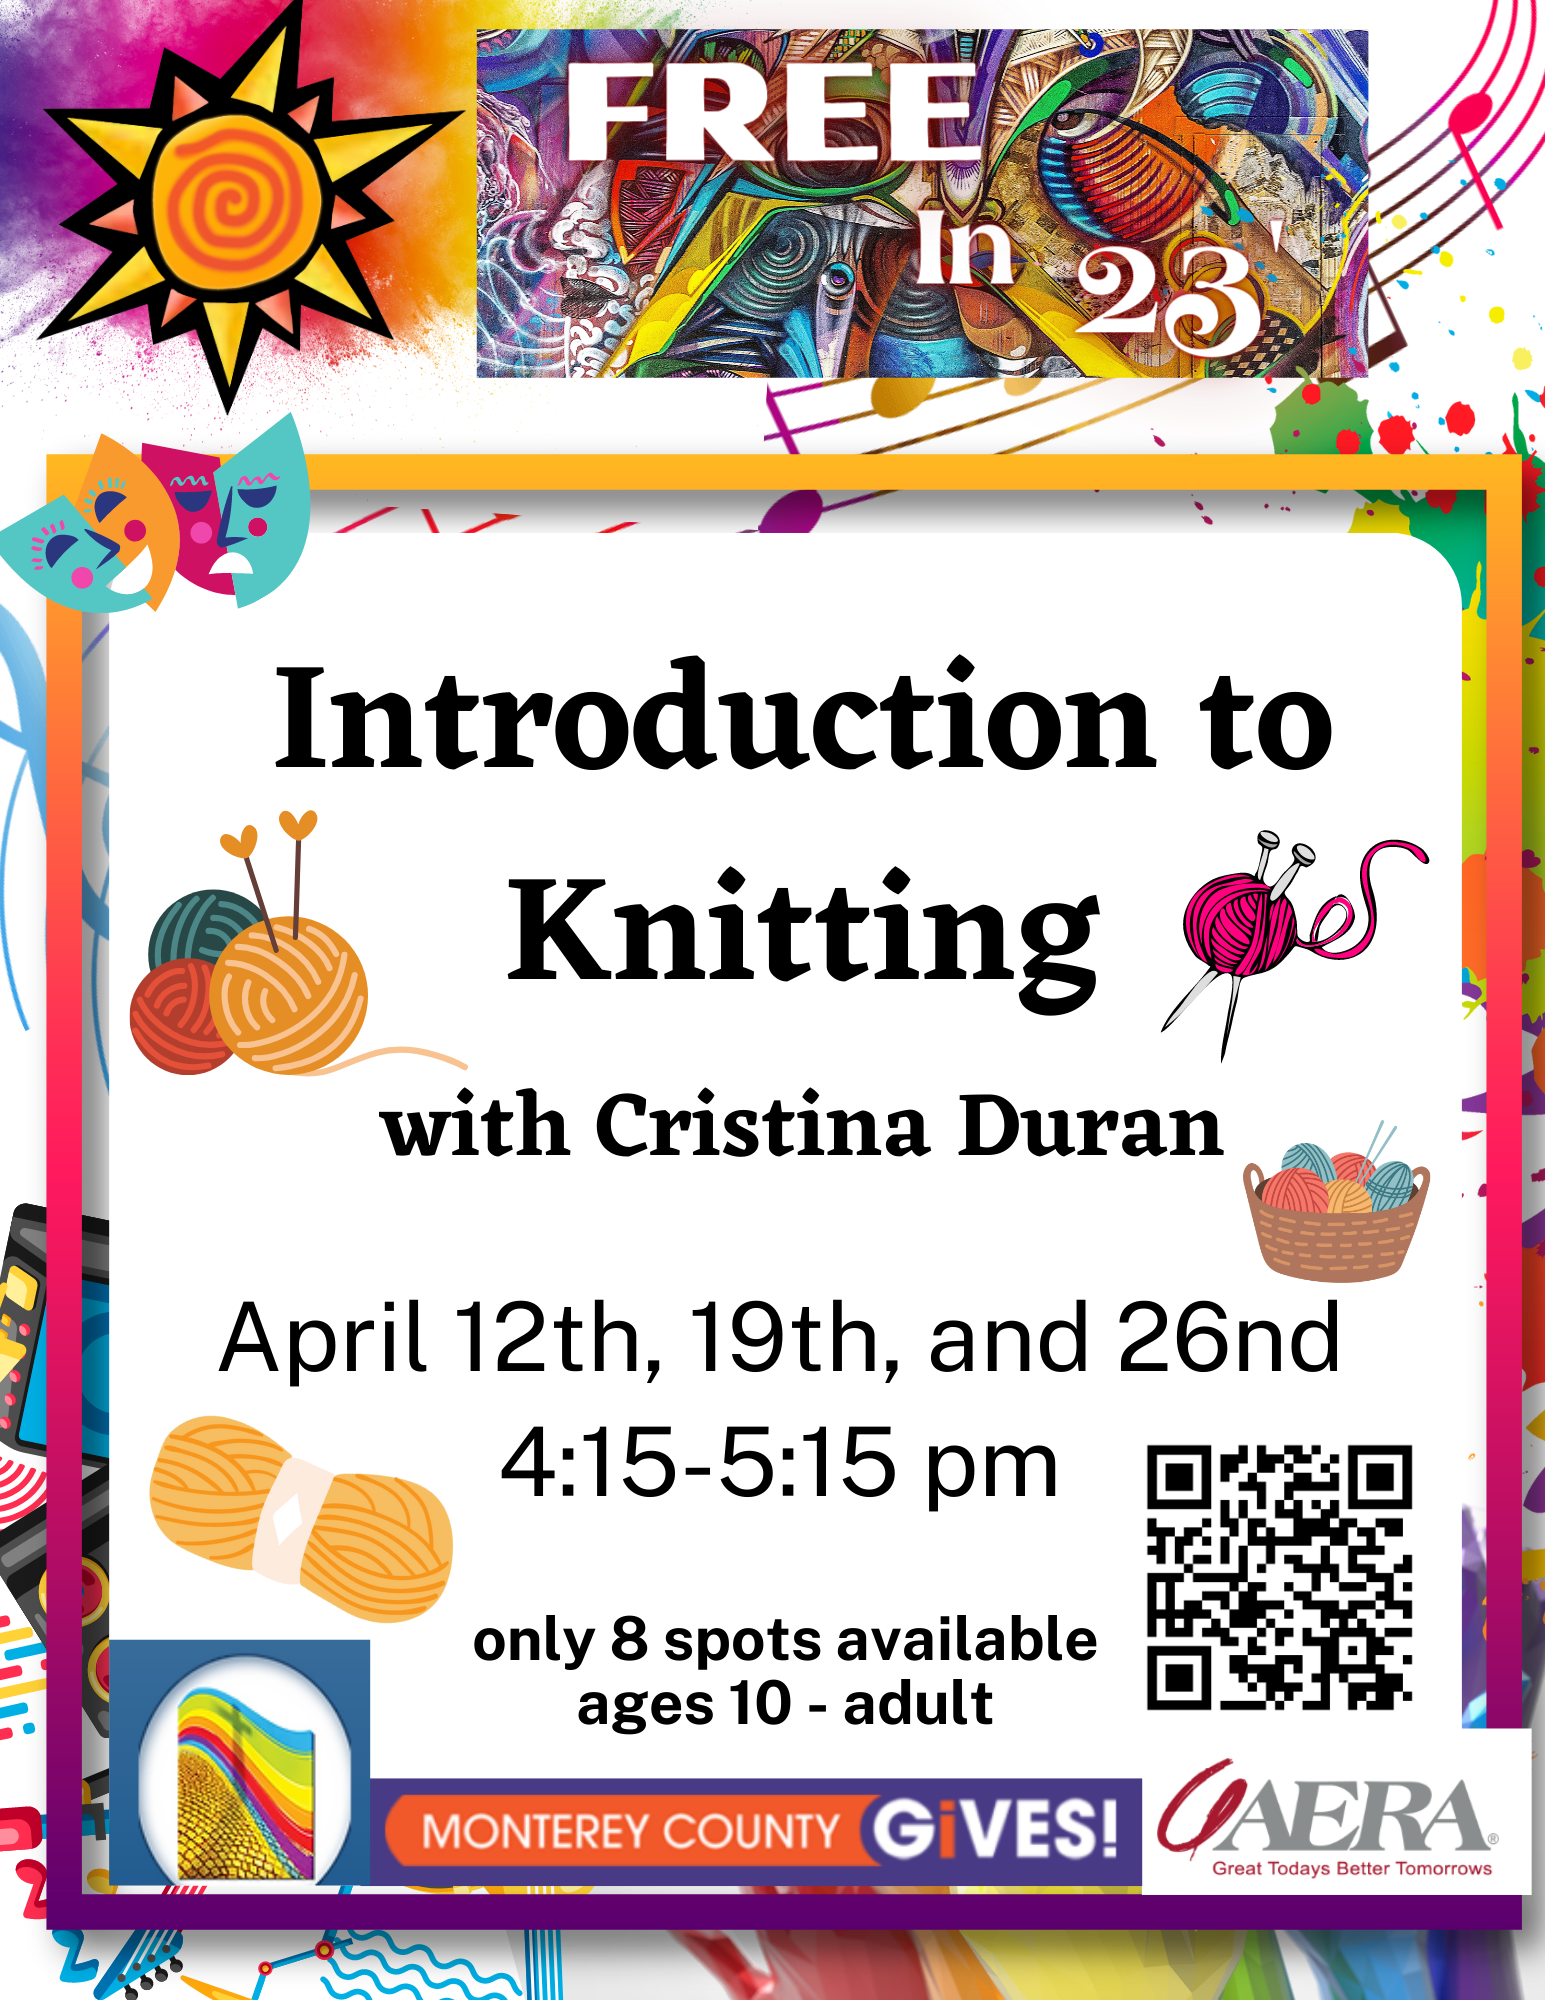 Flyer for Introduction to knitting class with cirstina duran on april 12th, 19th and 26th from 4:15 - 5:15 PM.